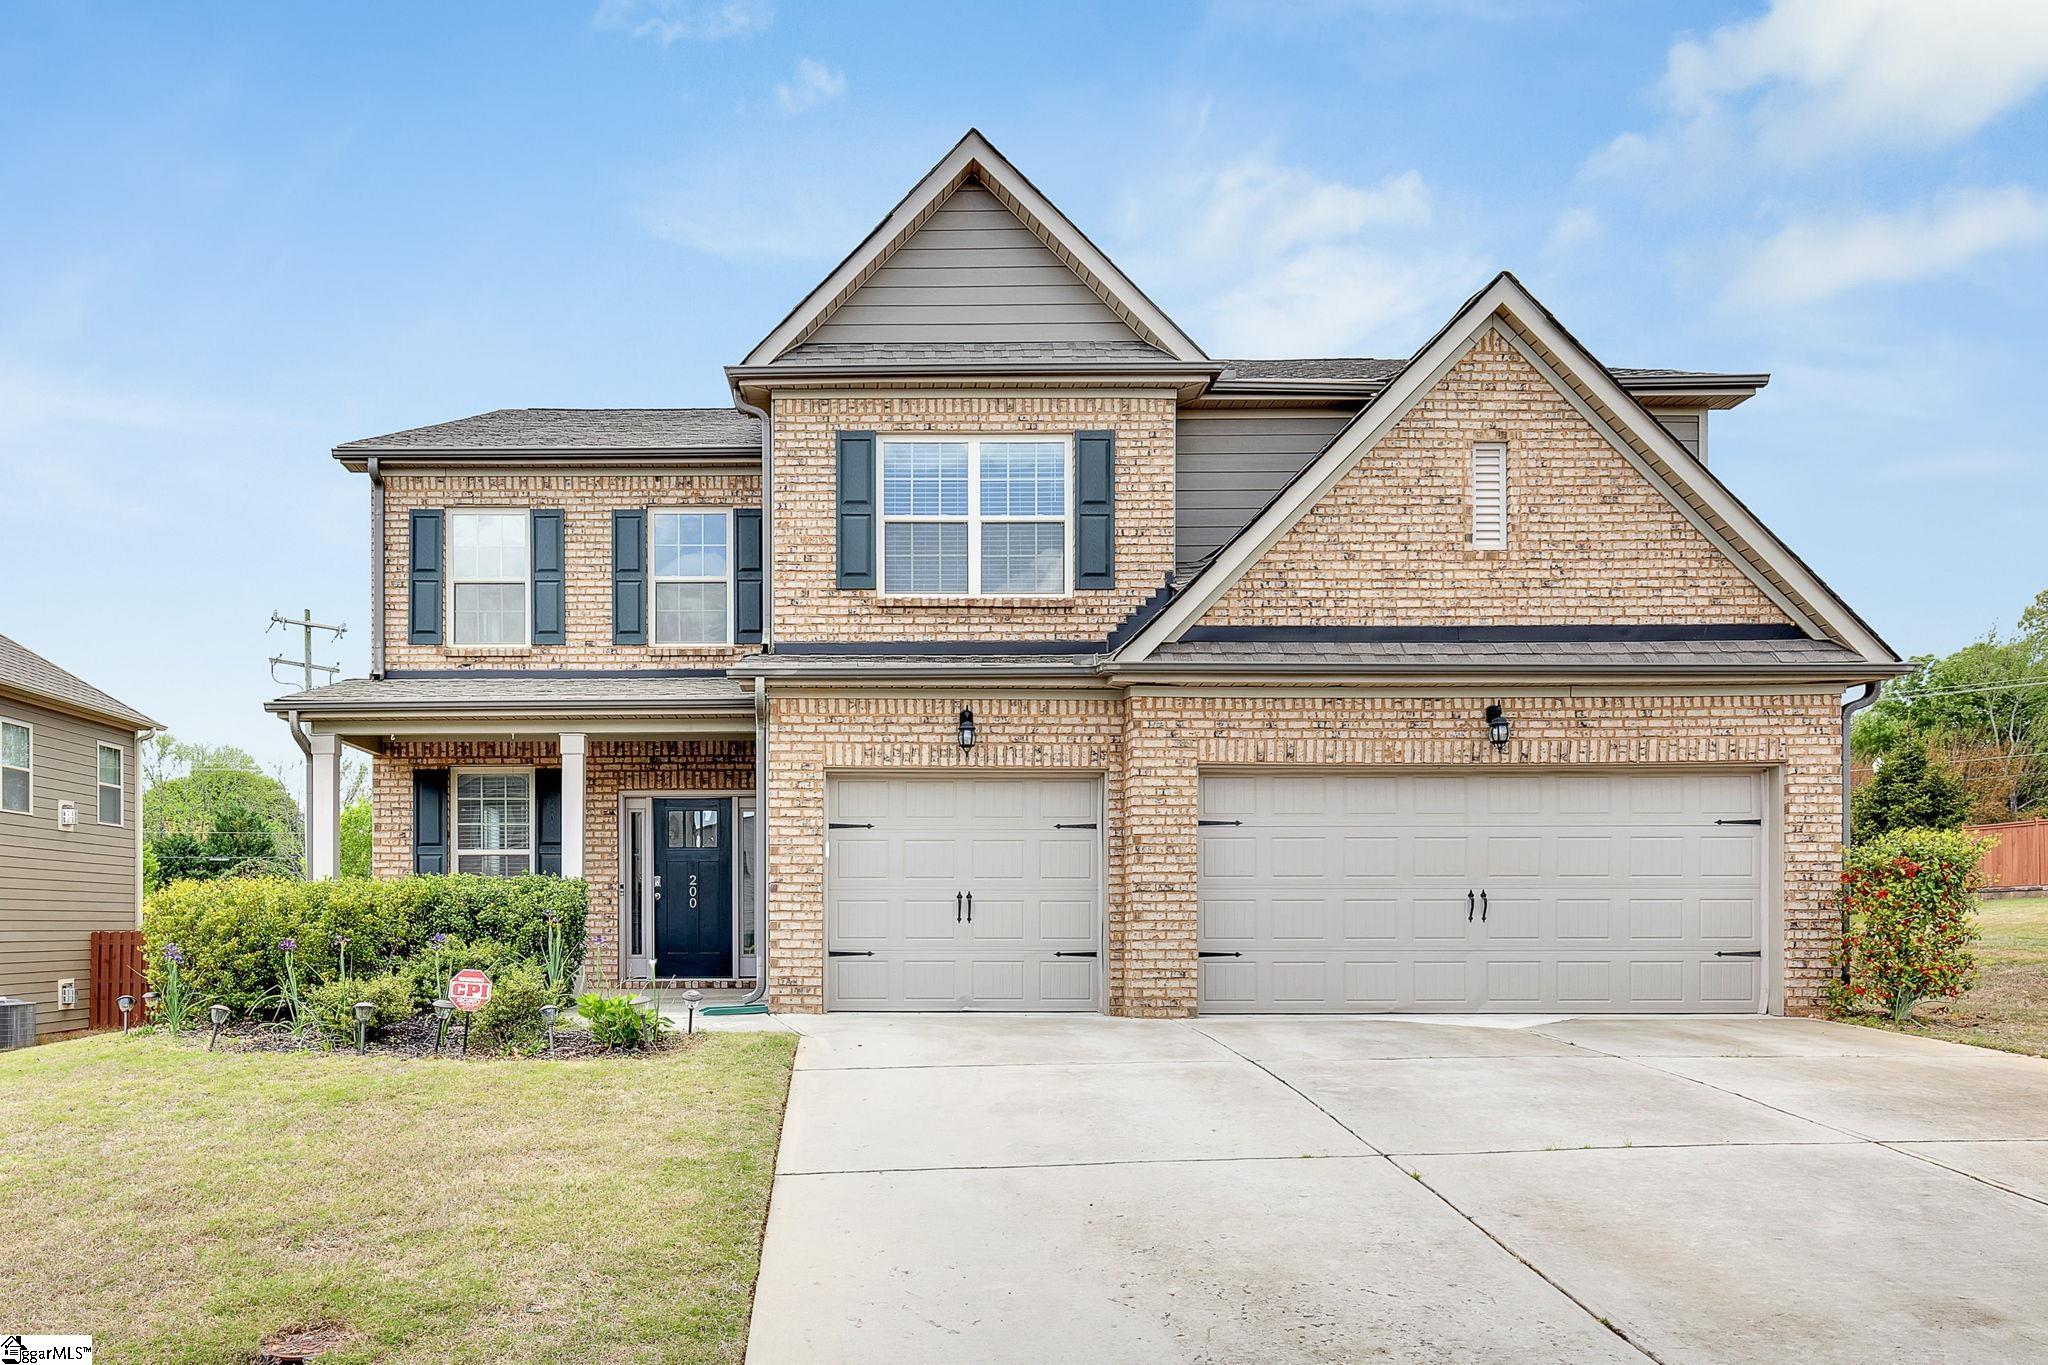 Great curb appeal welcomes you home each and every time!  Nicely landscaped, great front porch and a 3 car garage.